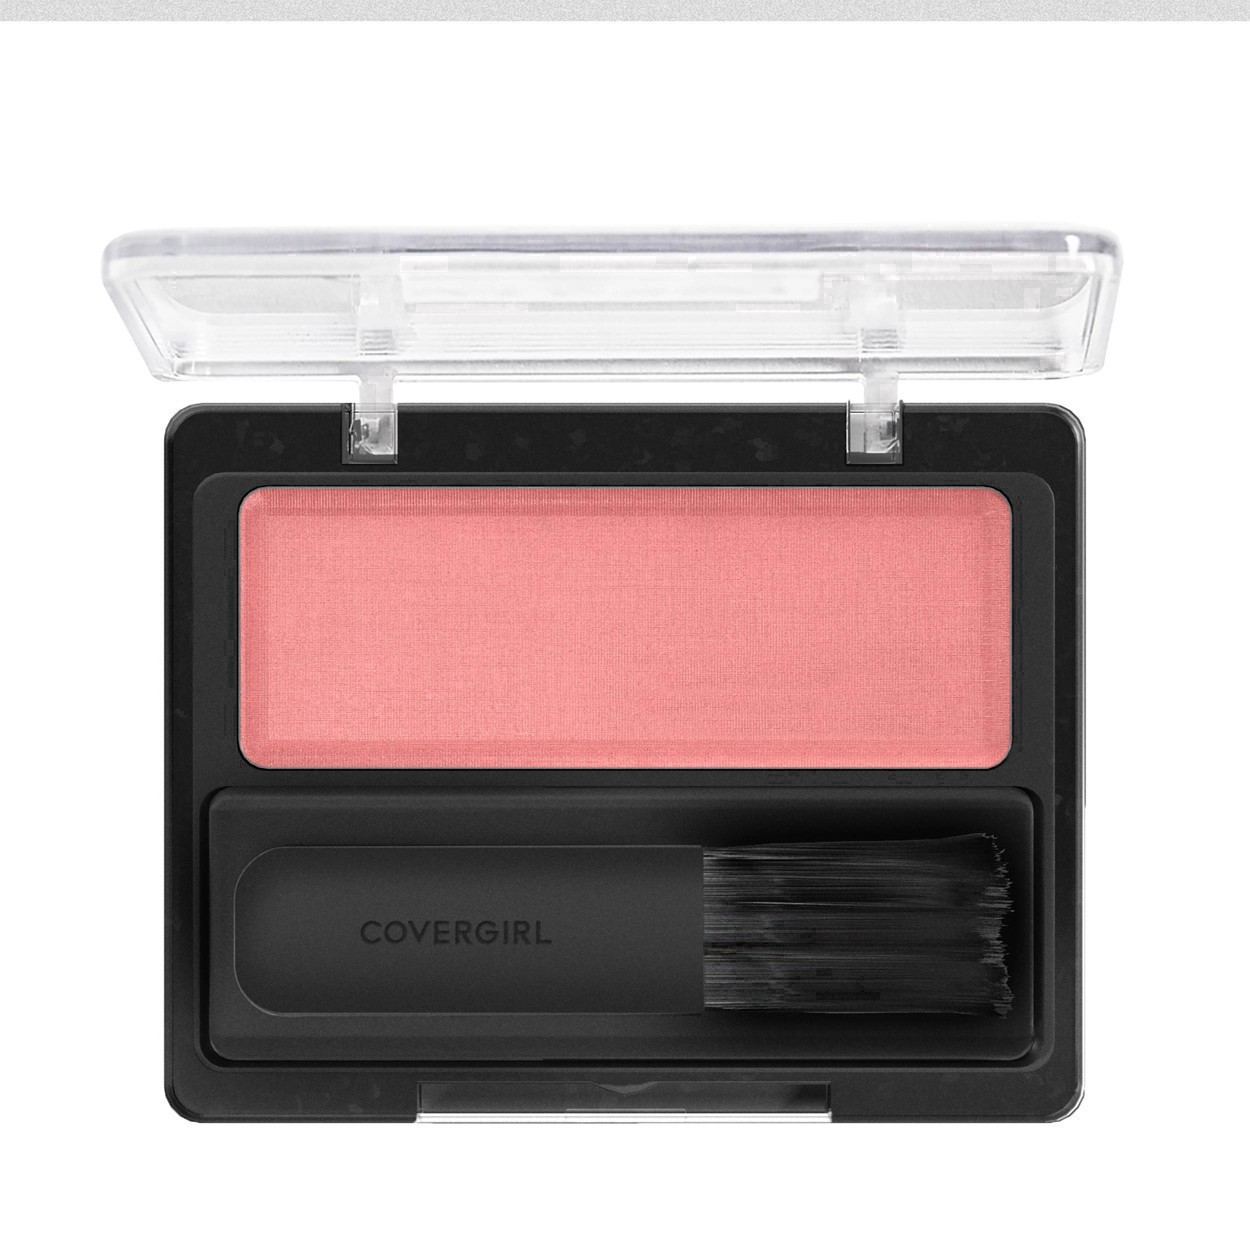 slide 10 of 42, Covergirl COVERGIRL Classic Color Blush Rose Silk, 1 ct